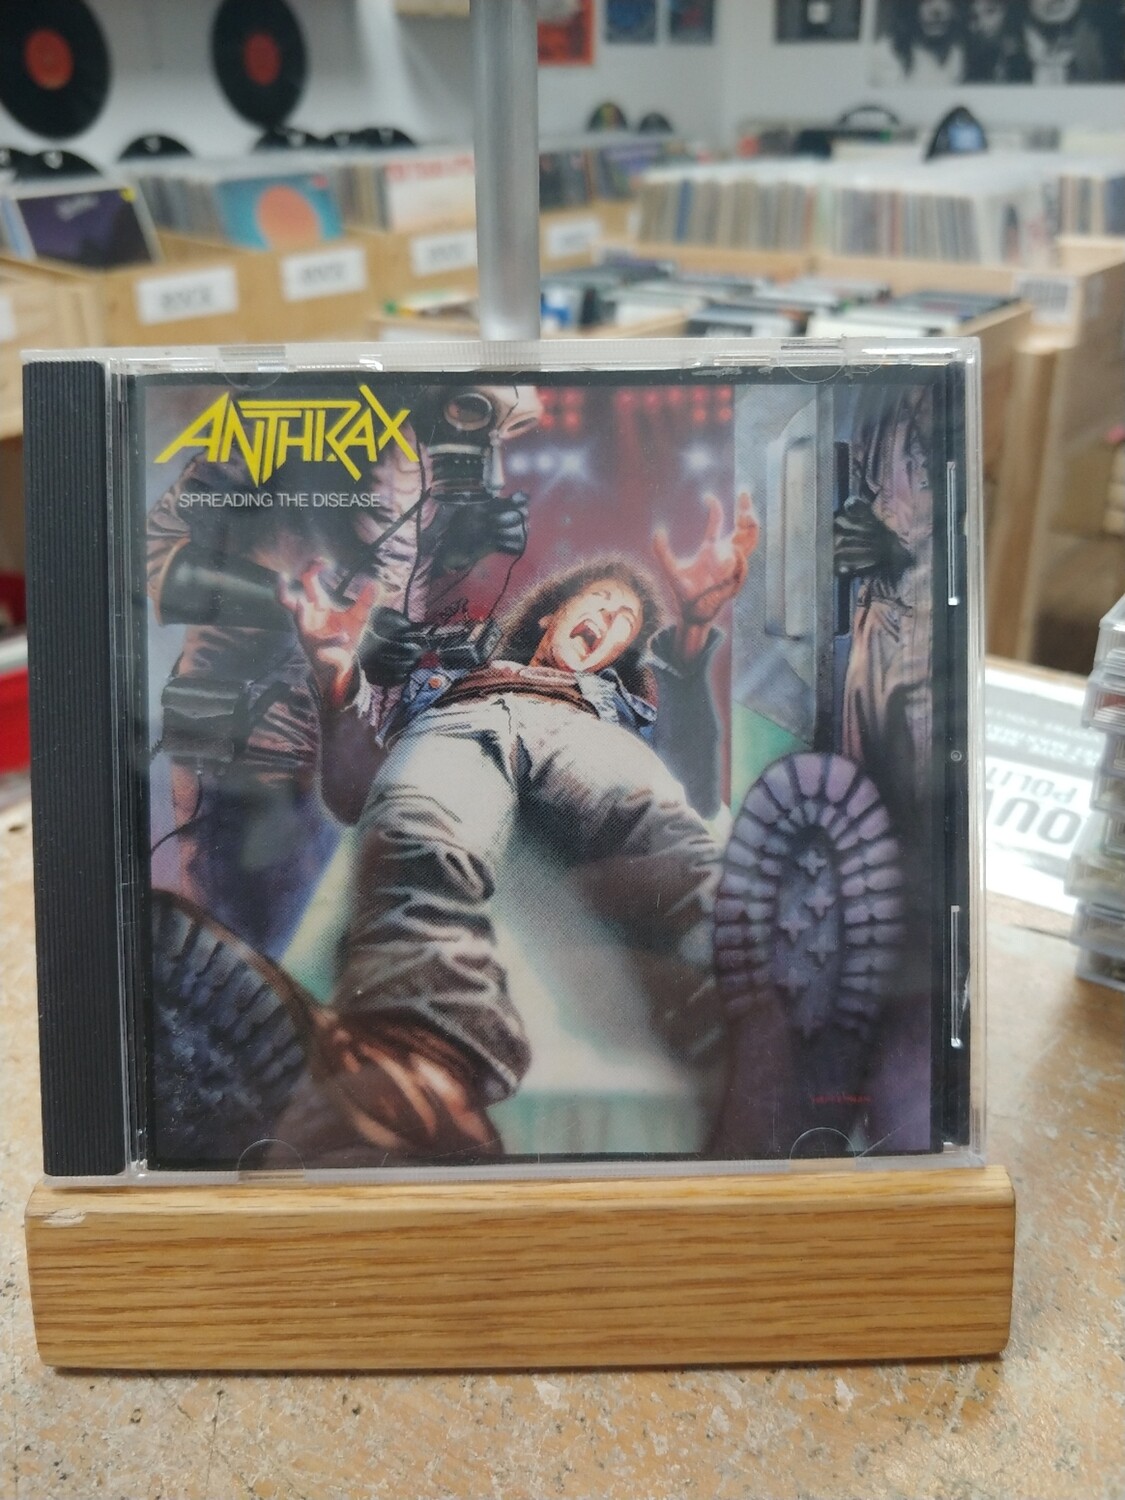 Anthrax - Spreading the disease (CD)